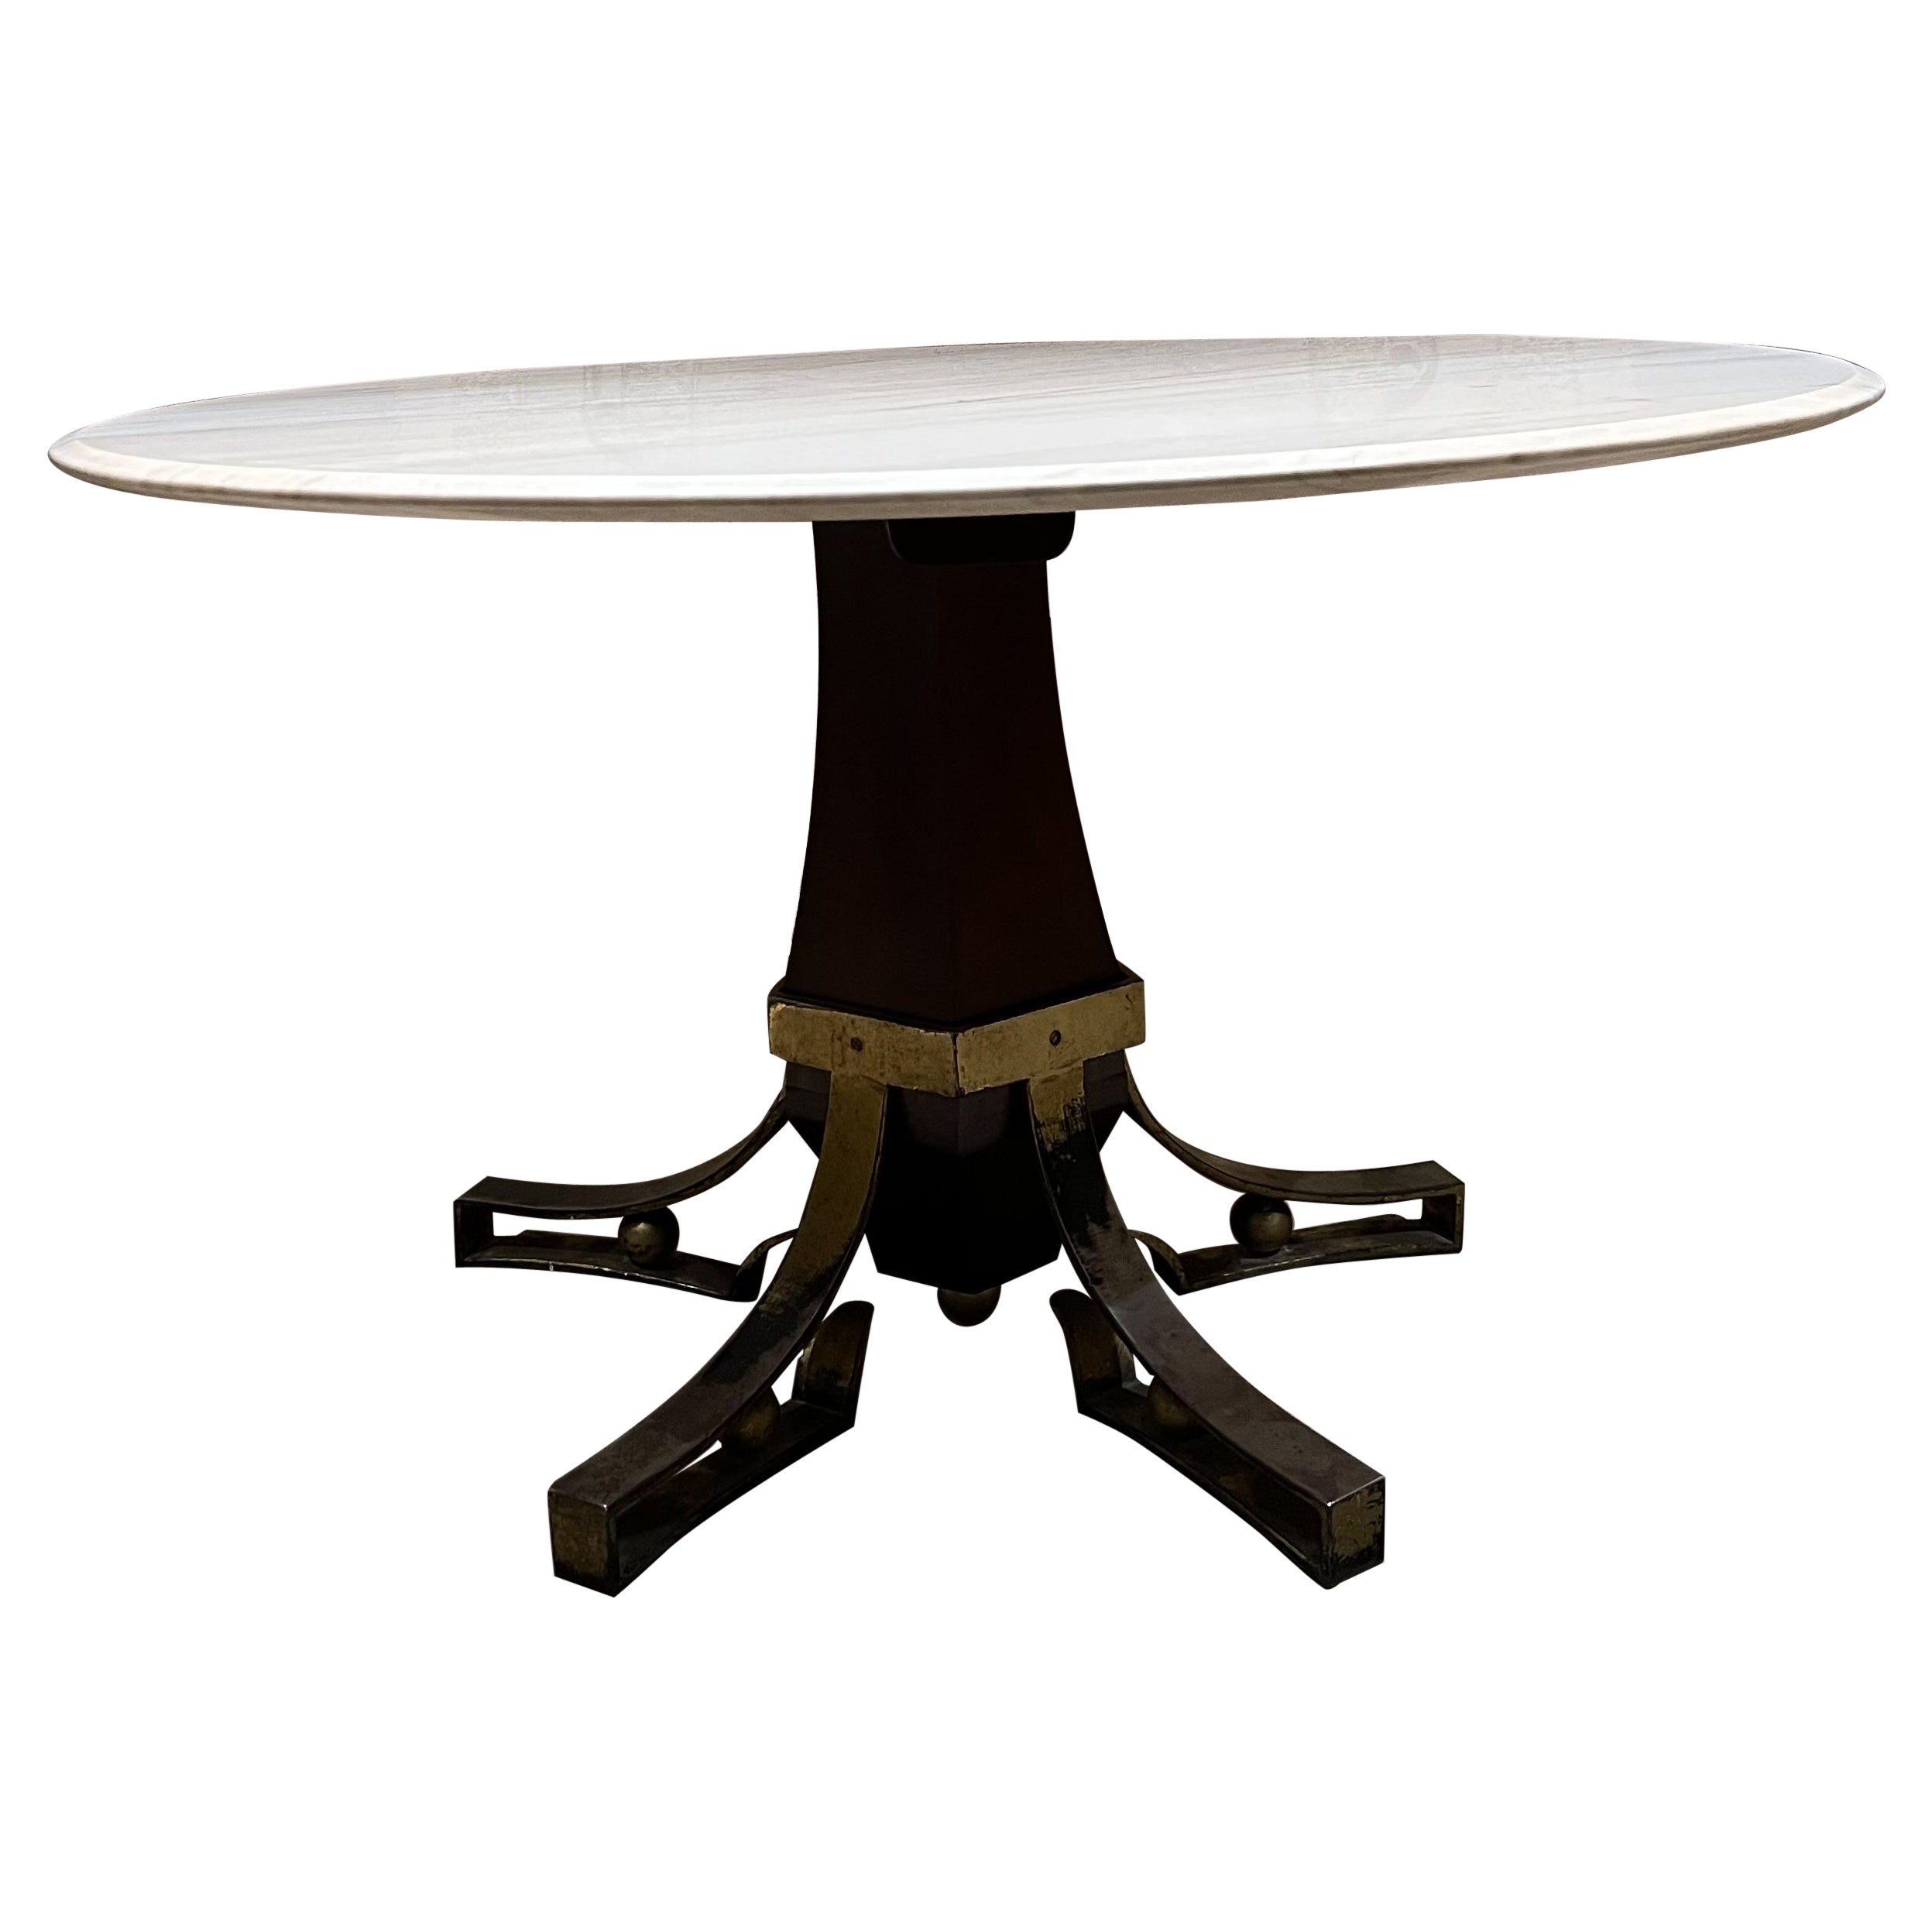 Modernist Dining Table in White Marble Sculptural Base Arturo Pani Mexico City For Sale